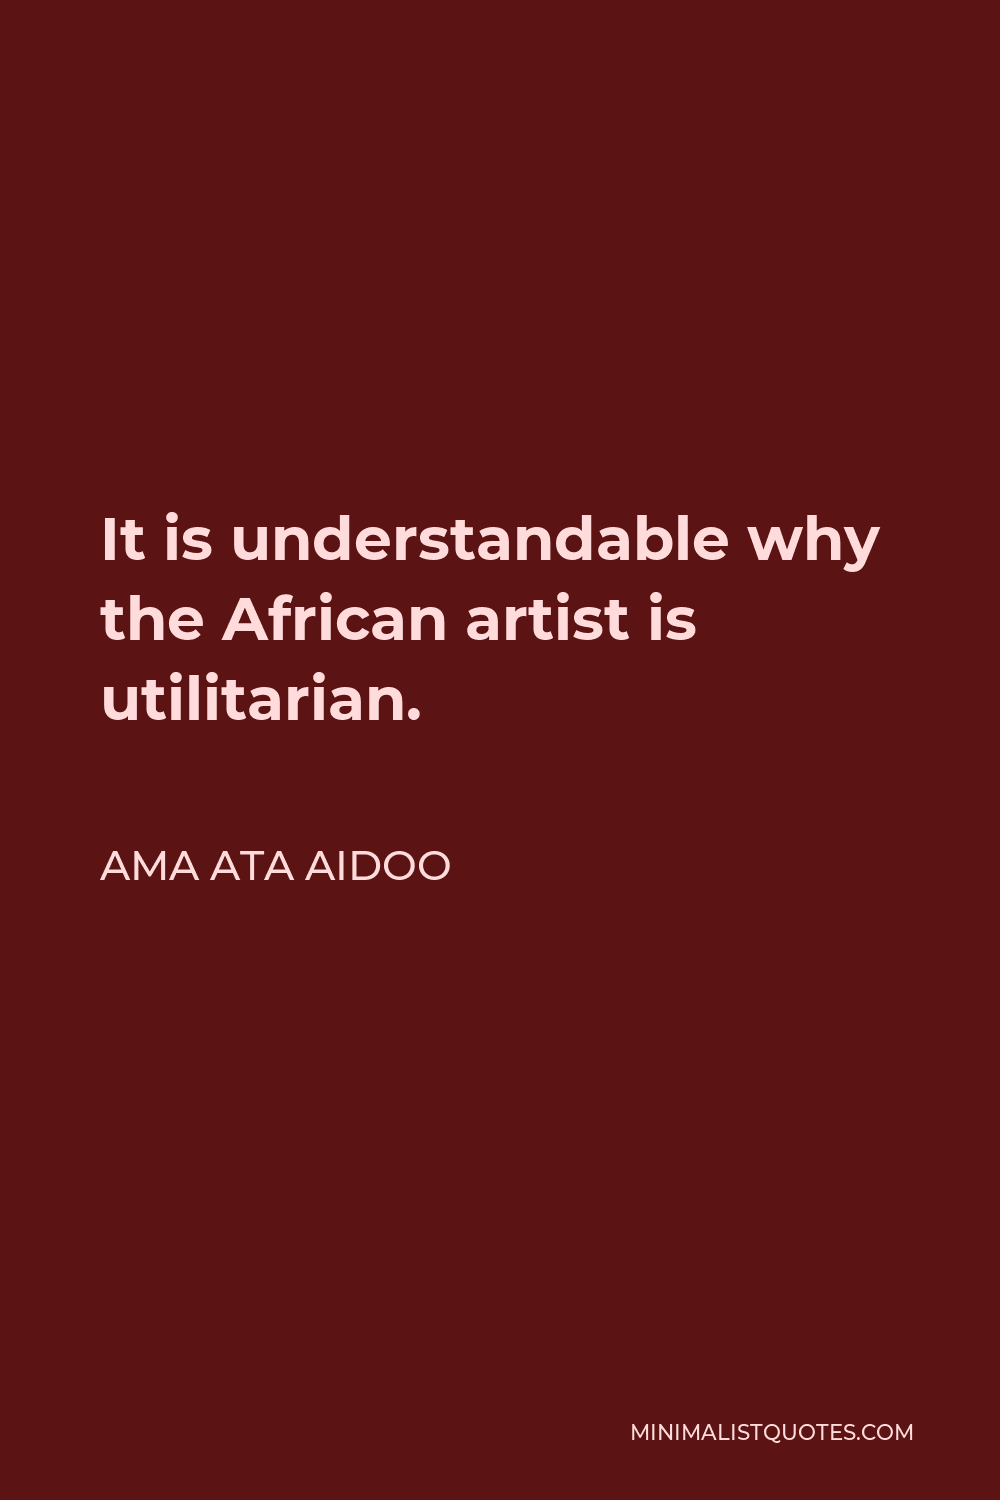 Ama Ata Aidoo Quote - It is understandable why the African artist is utilitarian.